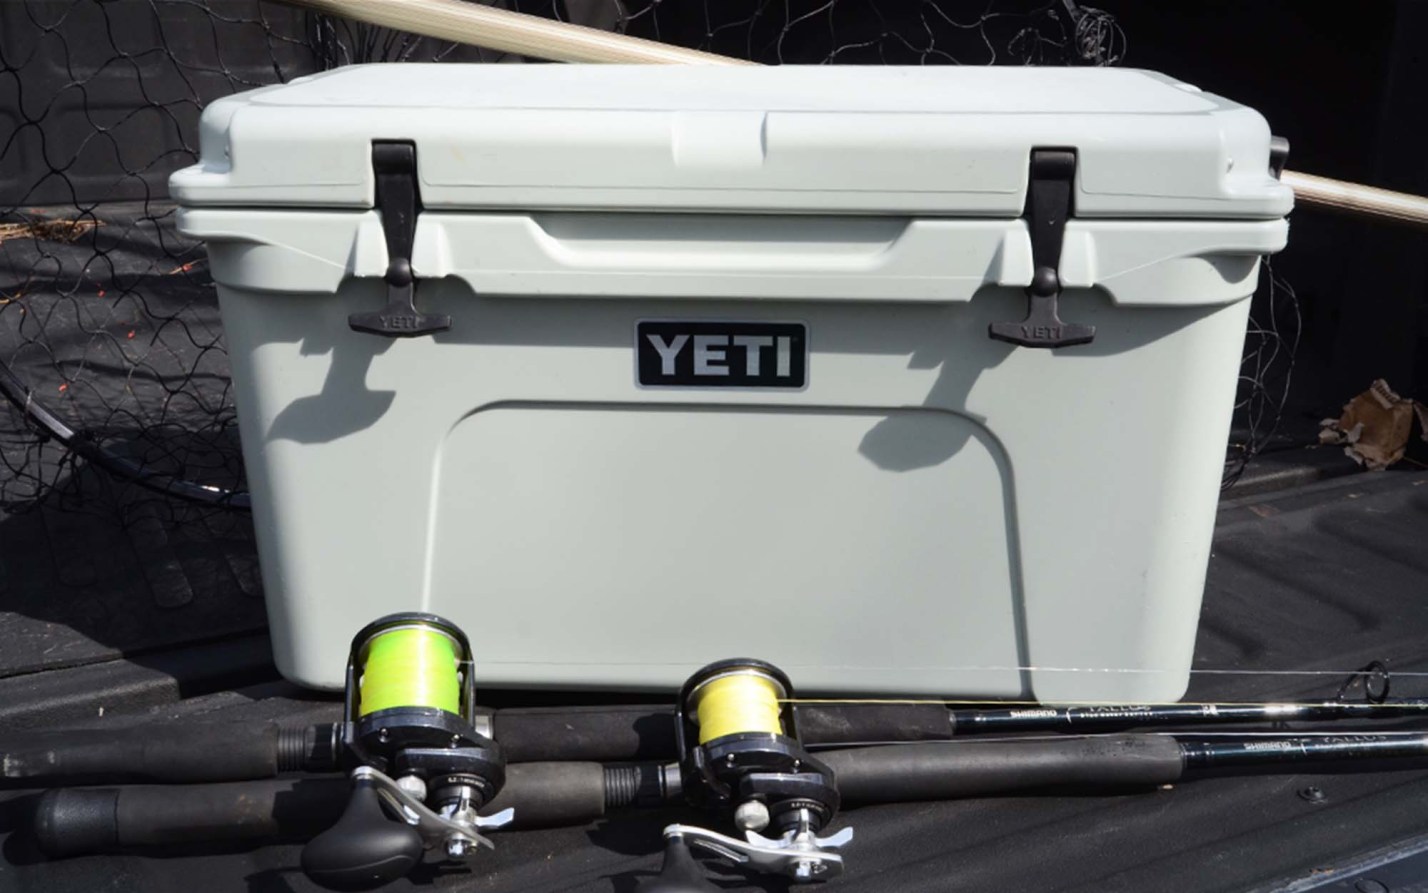 Convert Your Cooler into a Fishing Cart or a Rod Holding Cooler